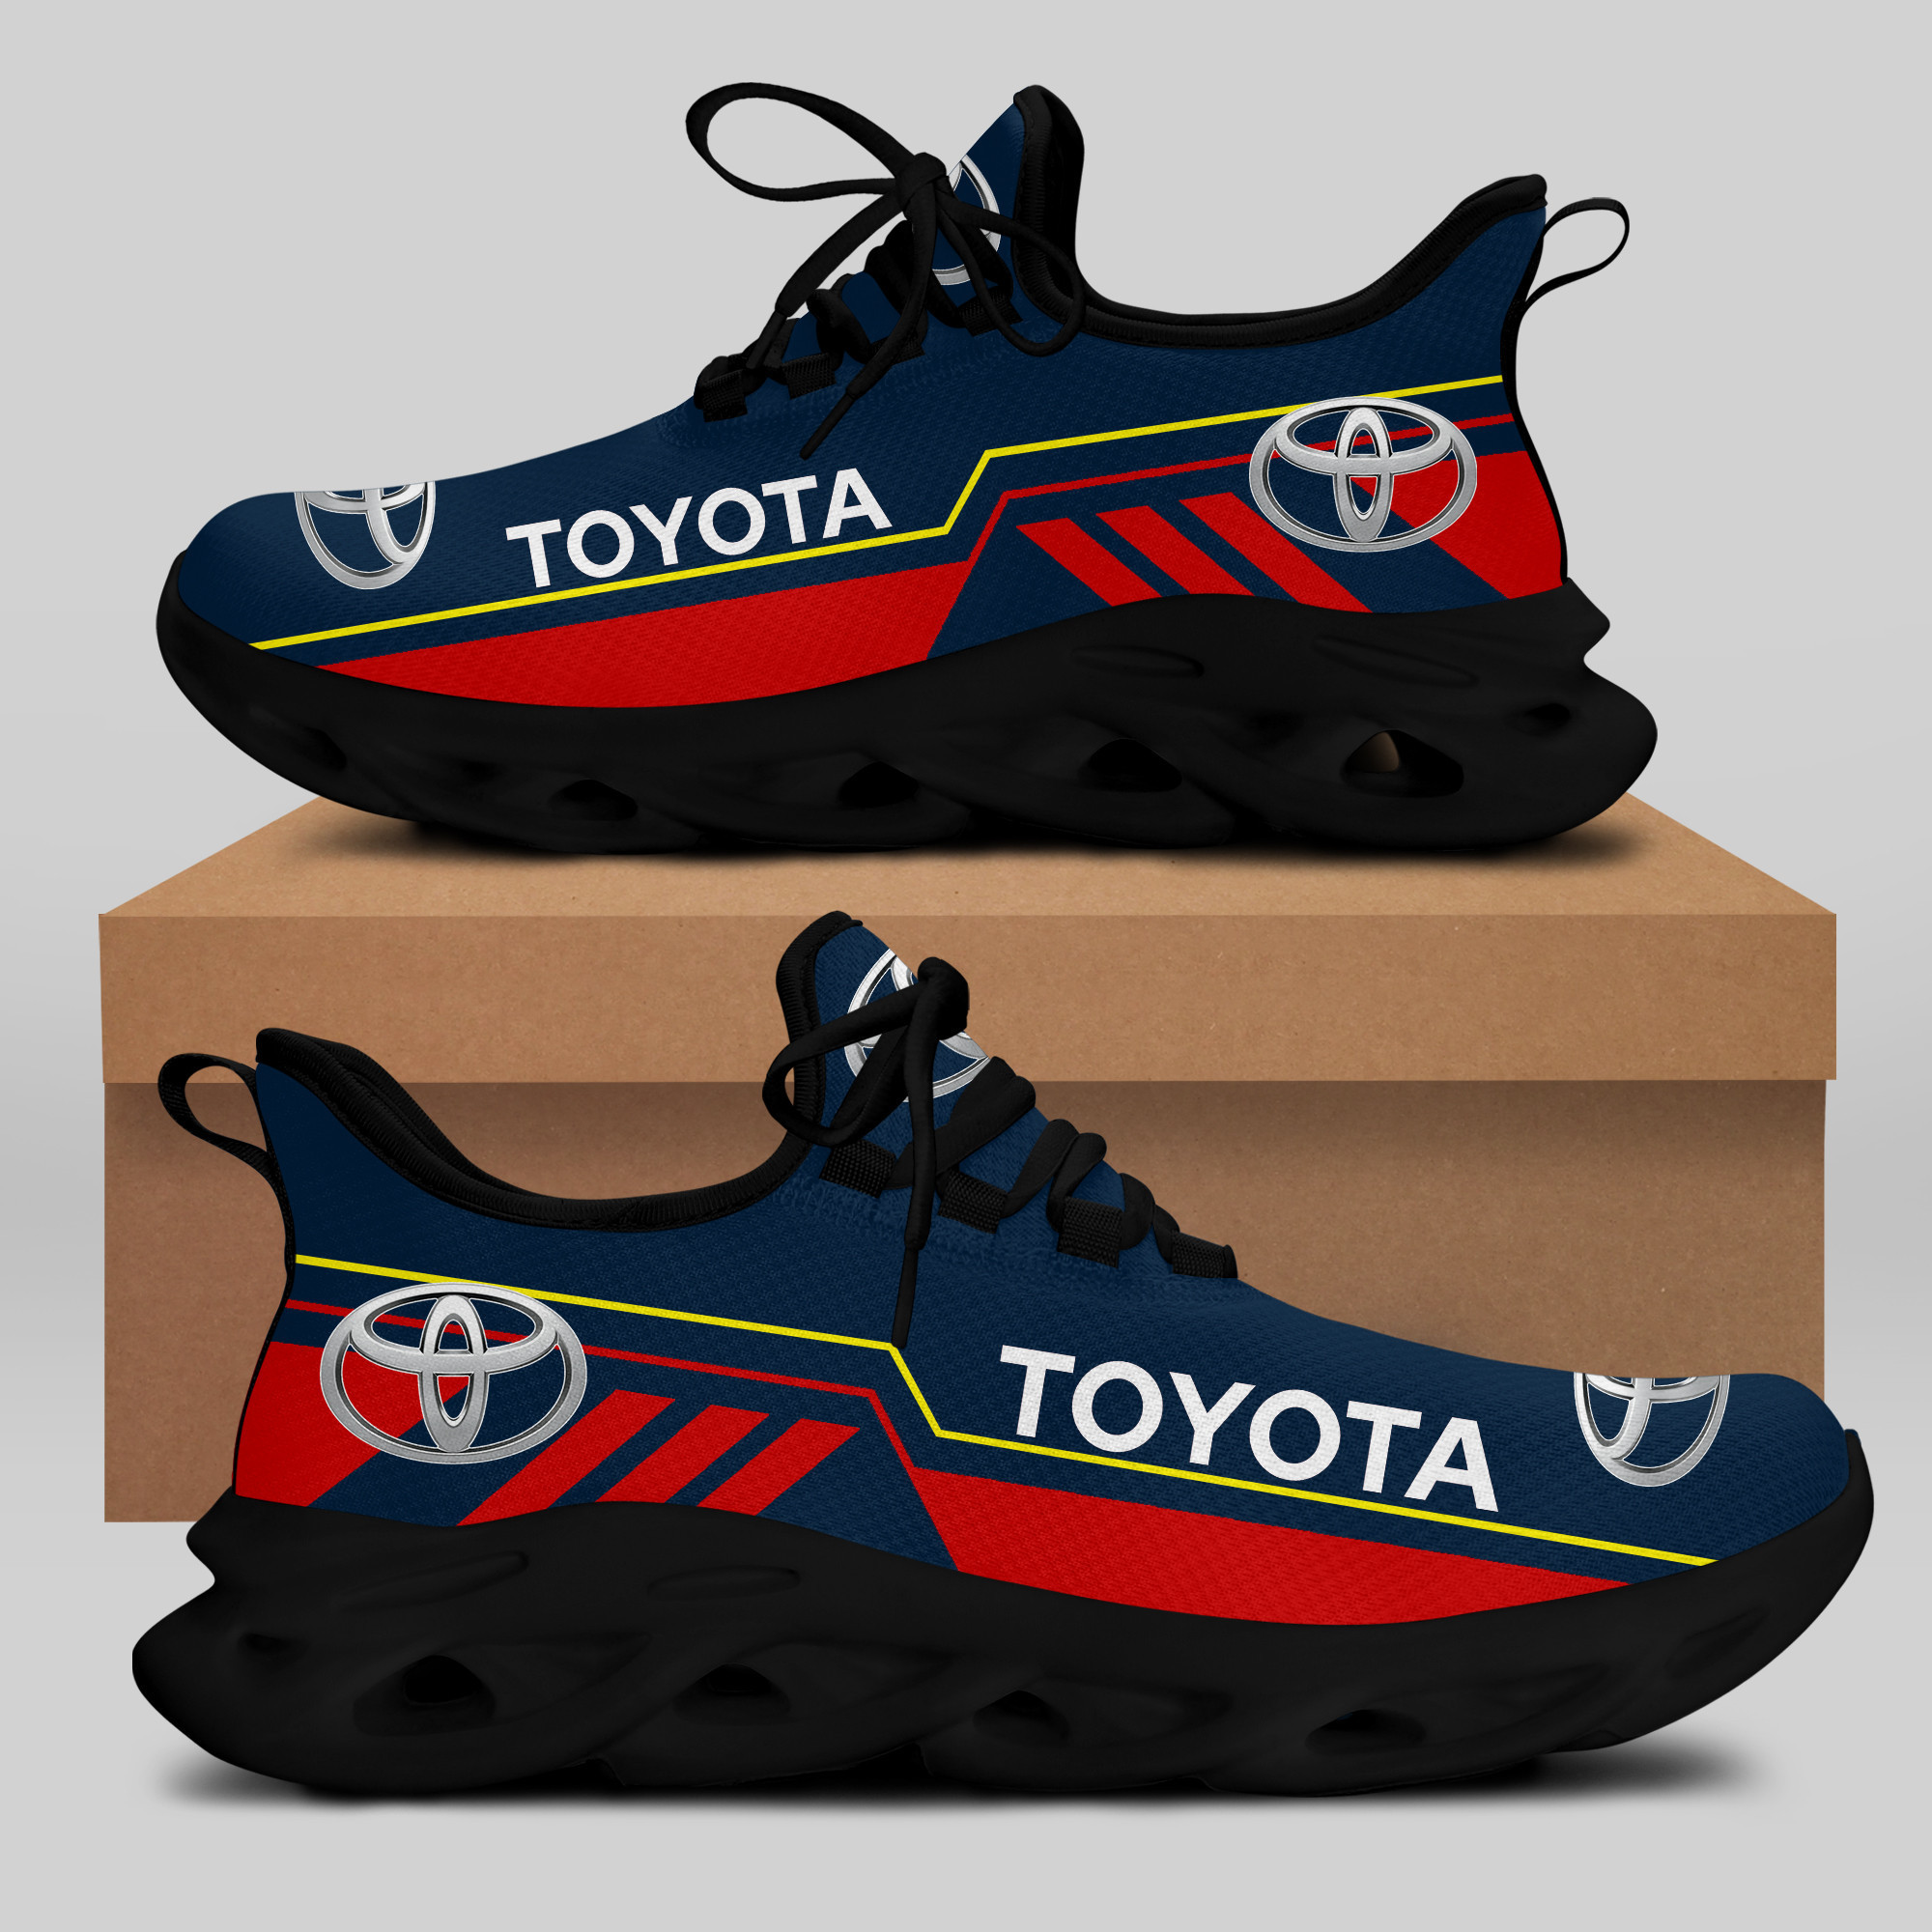 Toyota Sneakers RUNNING SHOES VER 8